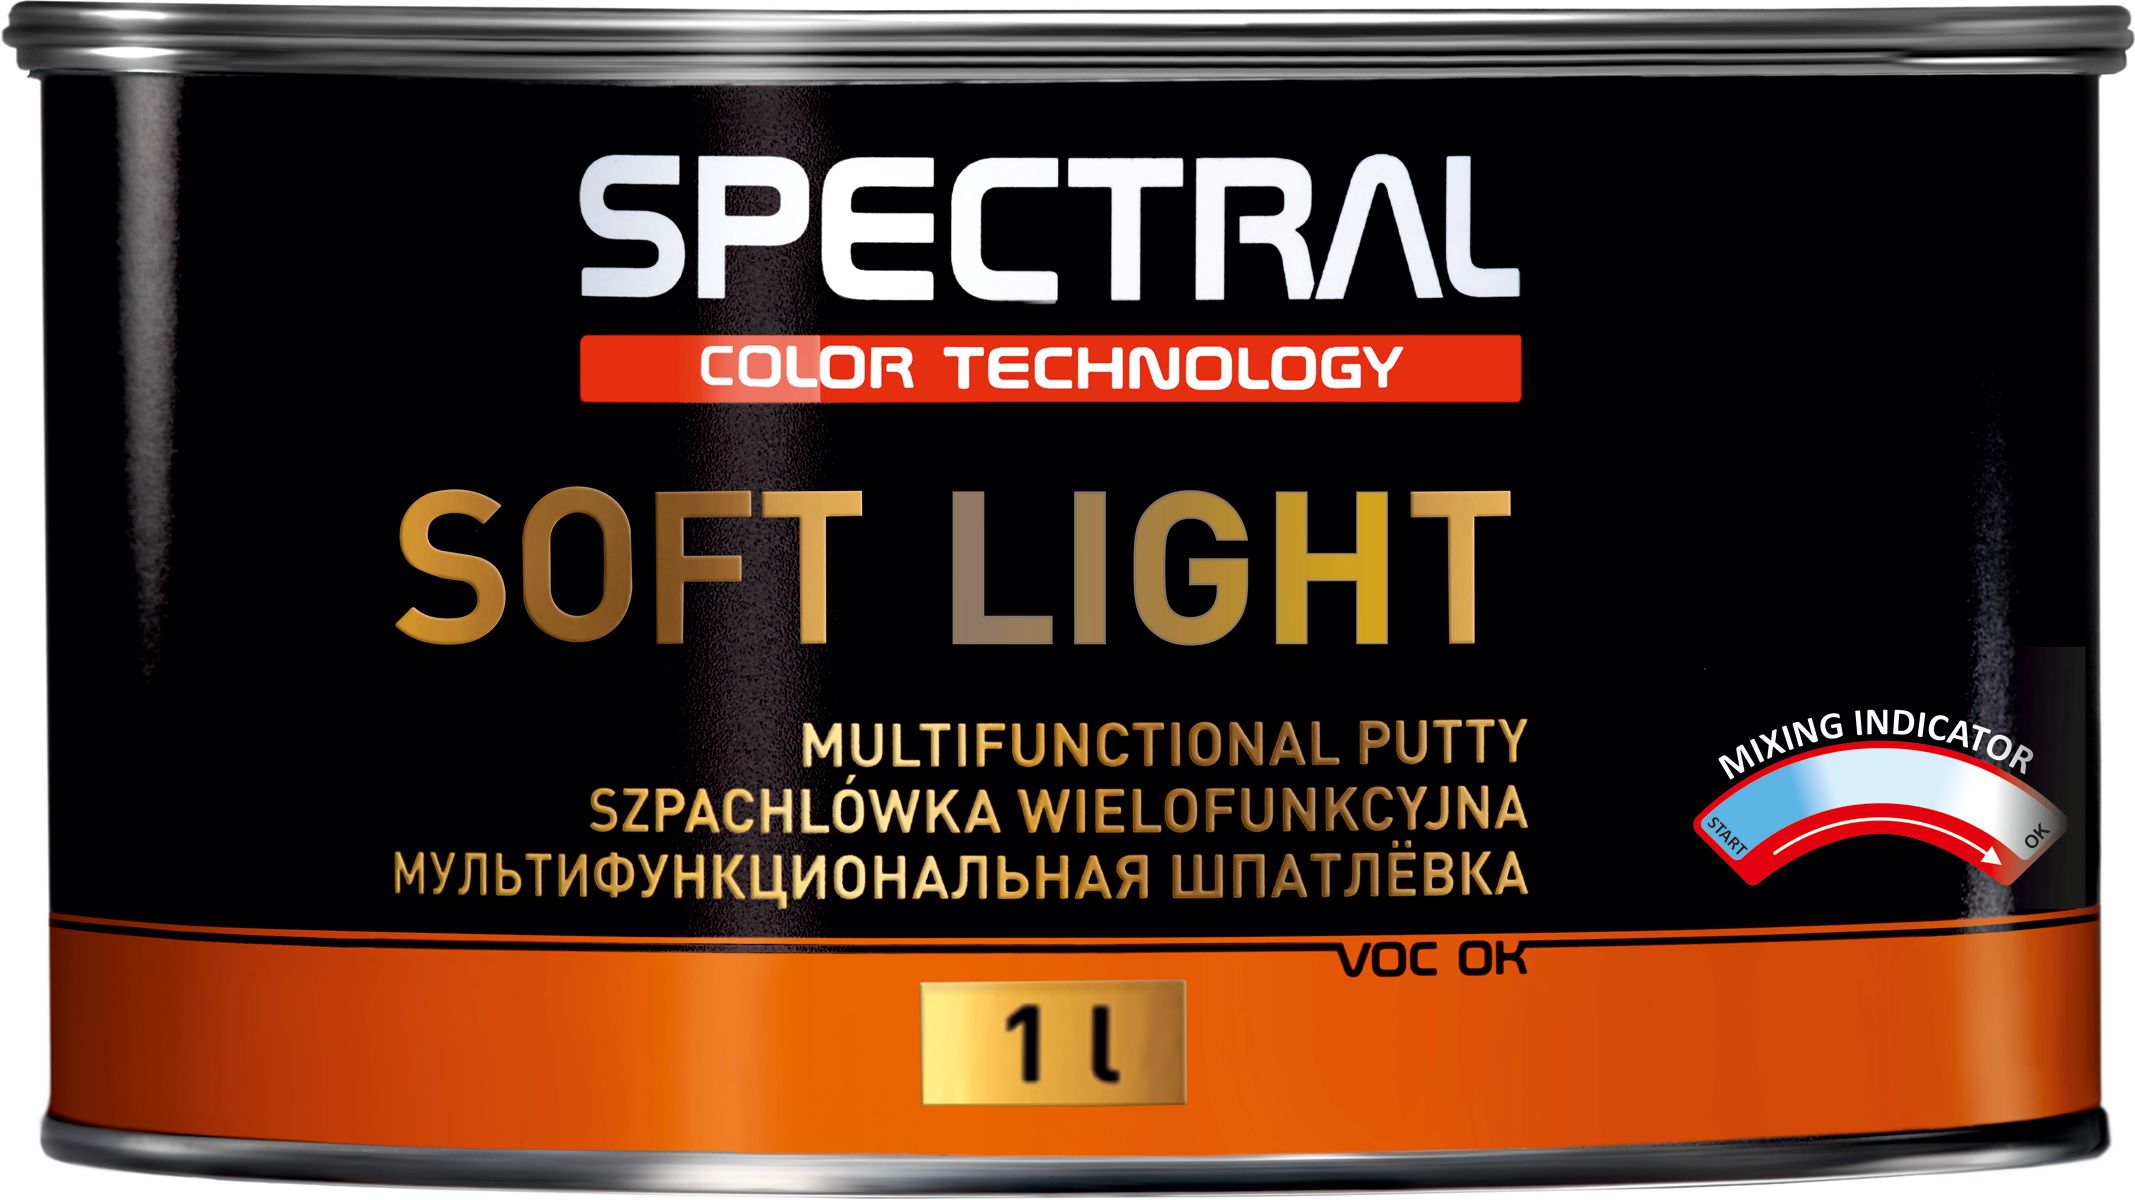 SOFT LIGHT - Two component multifunctional putty